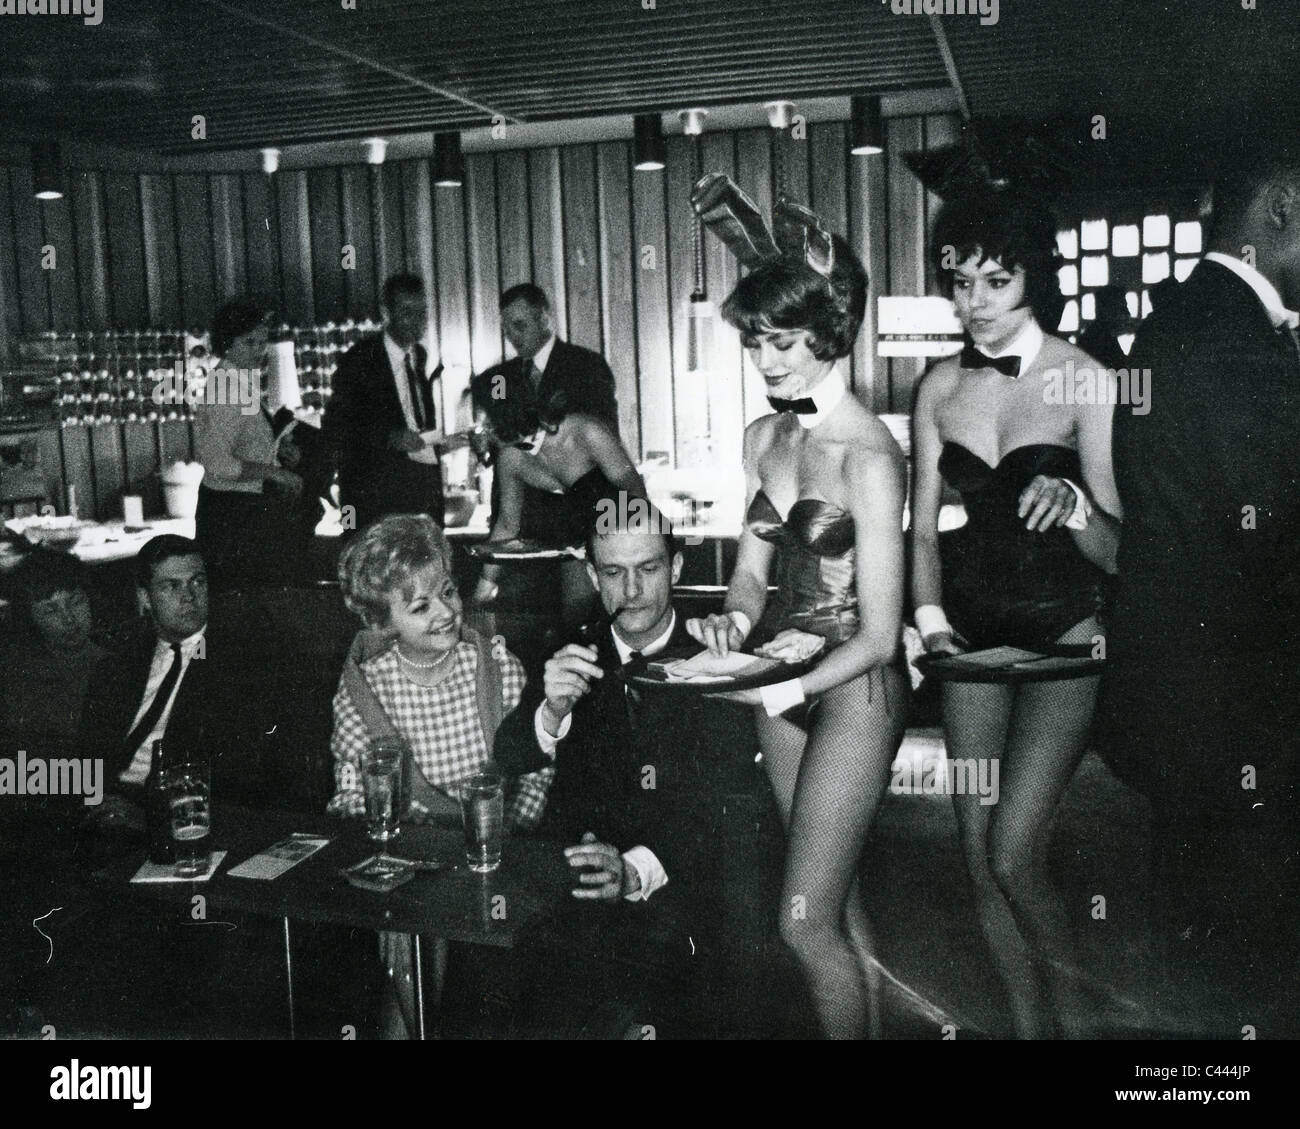 HUGH HEFNER founder of Playboy magazine with Bunnies in one of his Playboy Clubs about 1965 Stock Photo